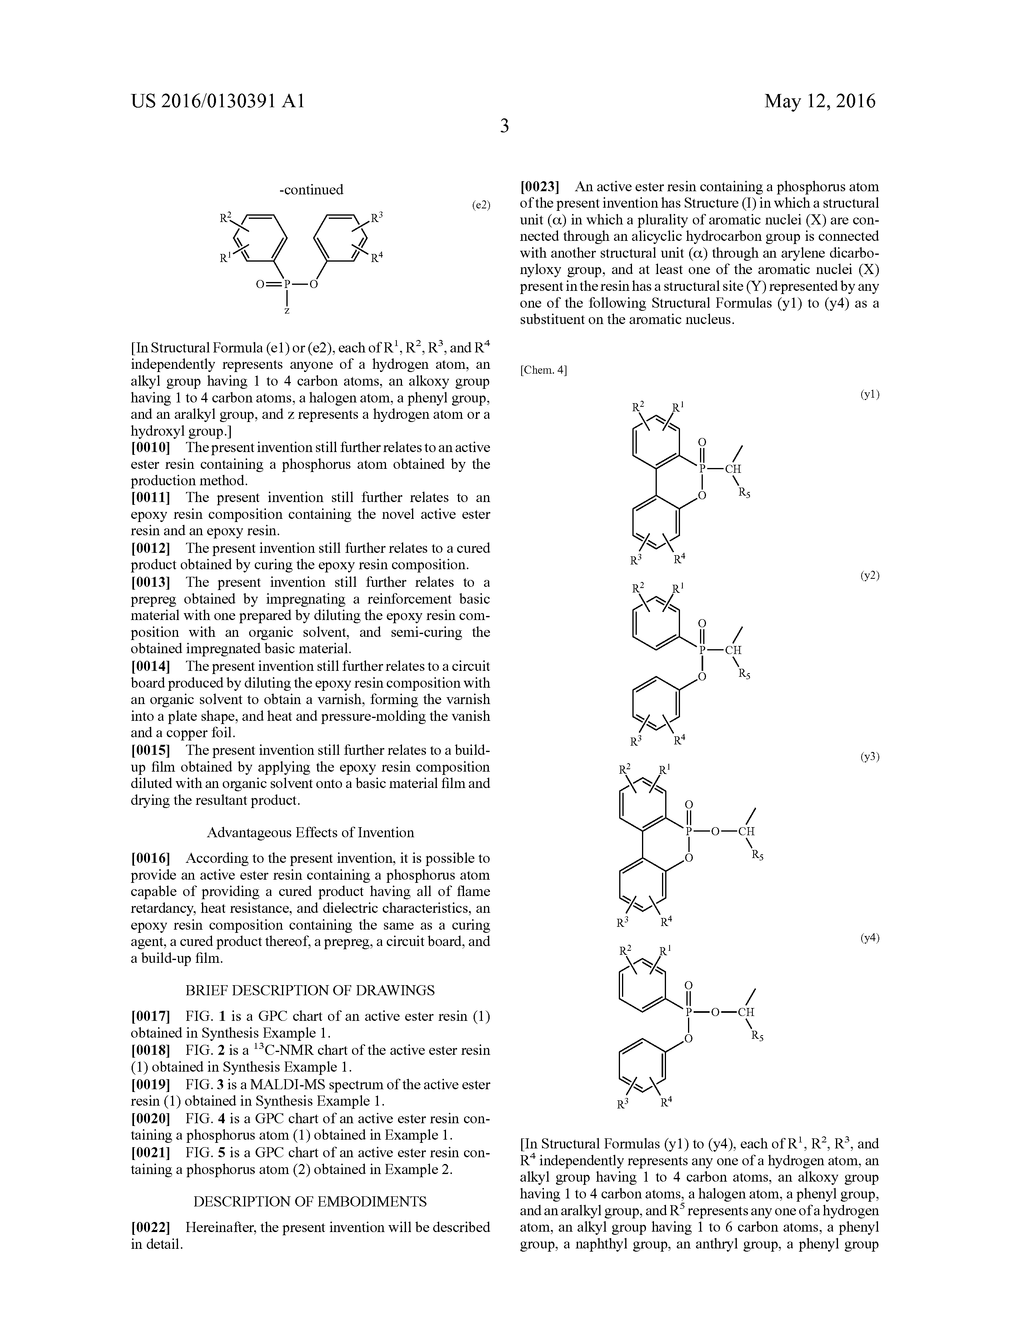 ACTIVE ESTER RESIN CONTAINING PHOSPHORUS ATOM, EPOXY RESIN COMPOSITION AND     CURED PRODUCT THEREOF, PREPREG, CIRCUIT BOARD, AND BUILD-UP FILM - diagram, schematic, and image 06